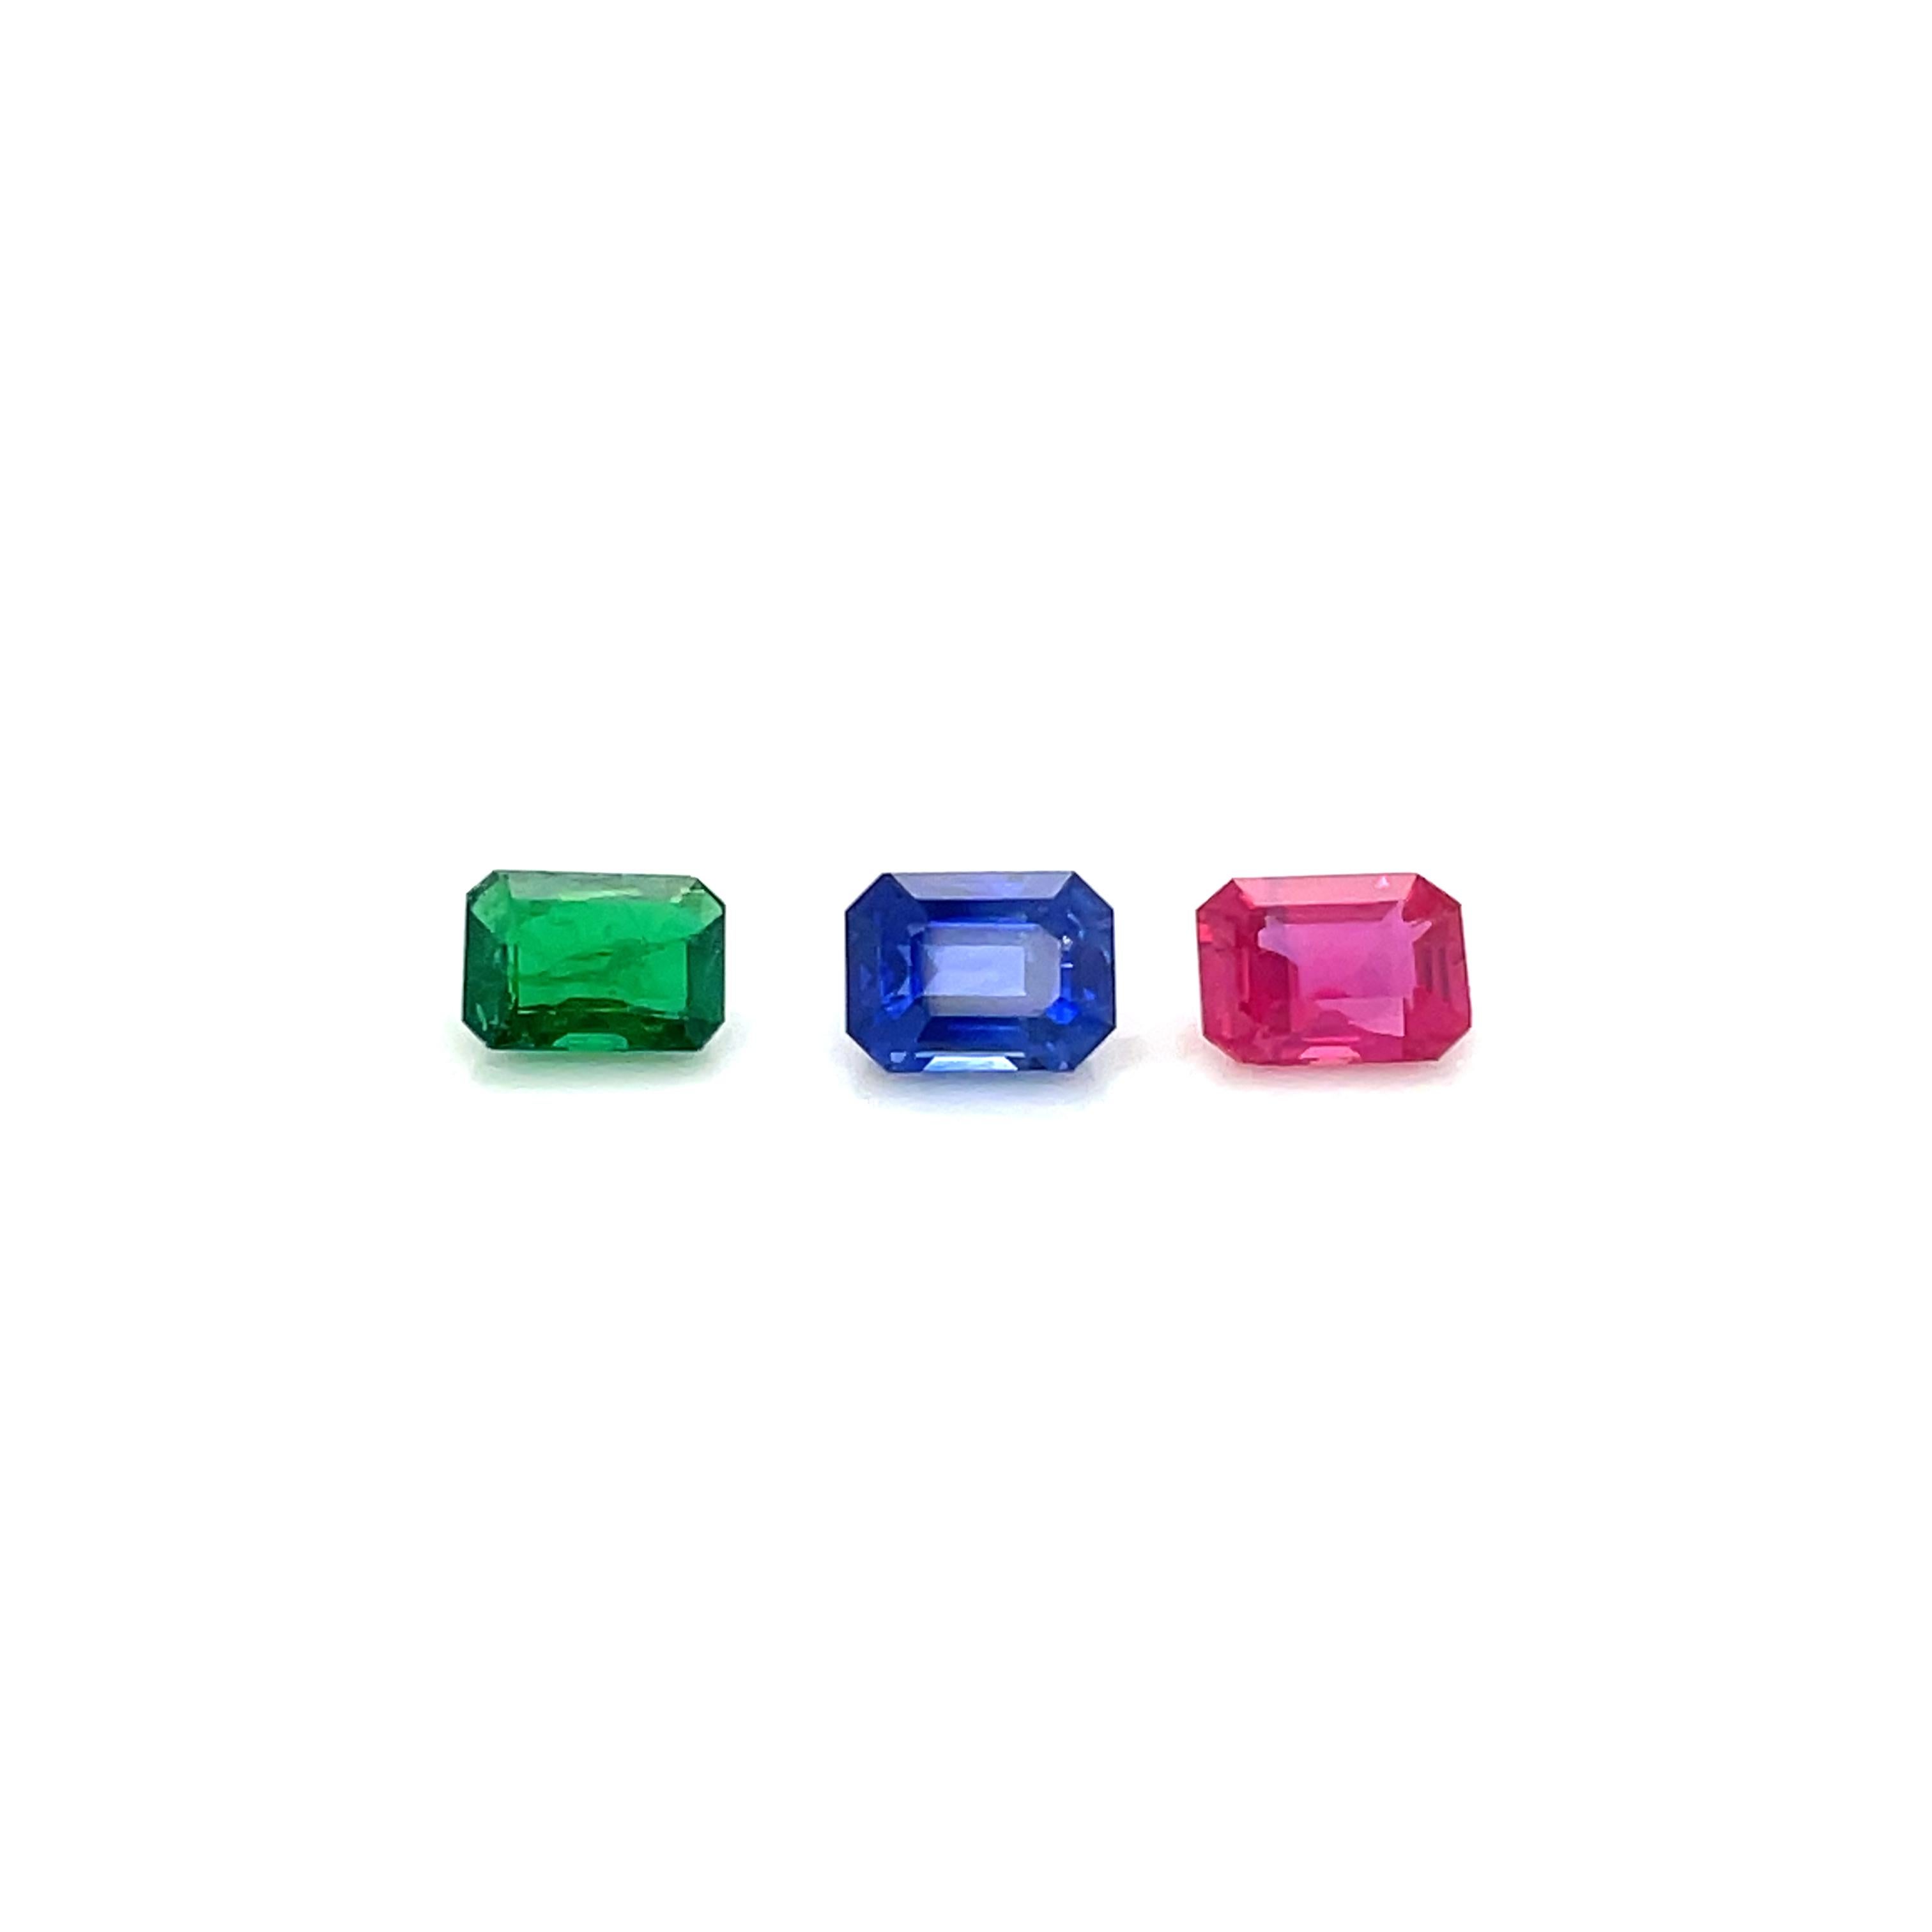 Octagon Cut Emerald-Cut Ruby Cts 1.31 and Blue Sapphire Cts 2.16 and Emerald Cts 0.92 Loose  For Sale